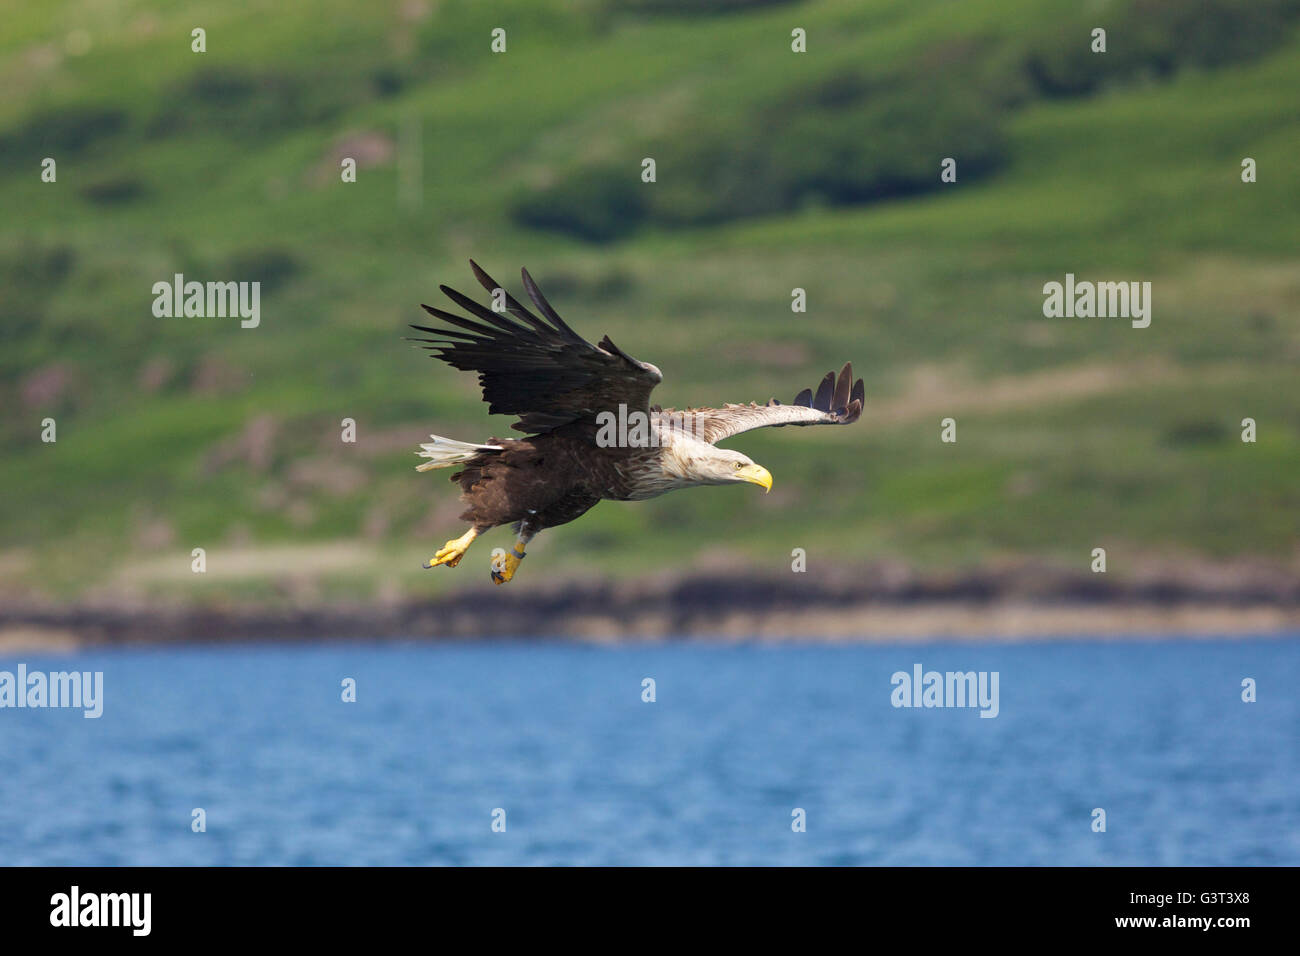 Loch Na Keal, Isle of Mull, Scotland, UK. 14th June 2016: UK weather. As many parts of the country suffer rain storms, the west coast of Scotland bathes in temperatures into the high teens and glorious sunshine as a White tailed Sea Eagle (Haliaetus albicilla) takes a fish thrown from a boat. These birds were reintroduced into Scotland from Norway in the 1970's after being extinct since 1918. Credit:  Alan Payton/Alamy Live News Stock Photo